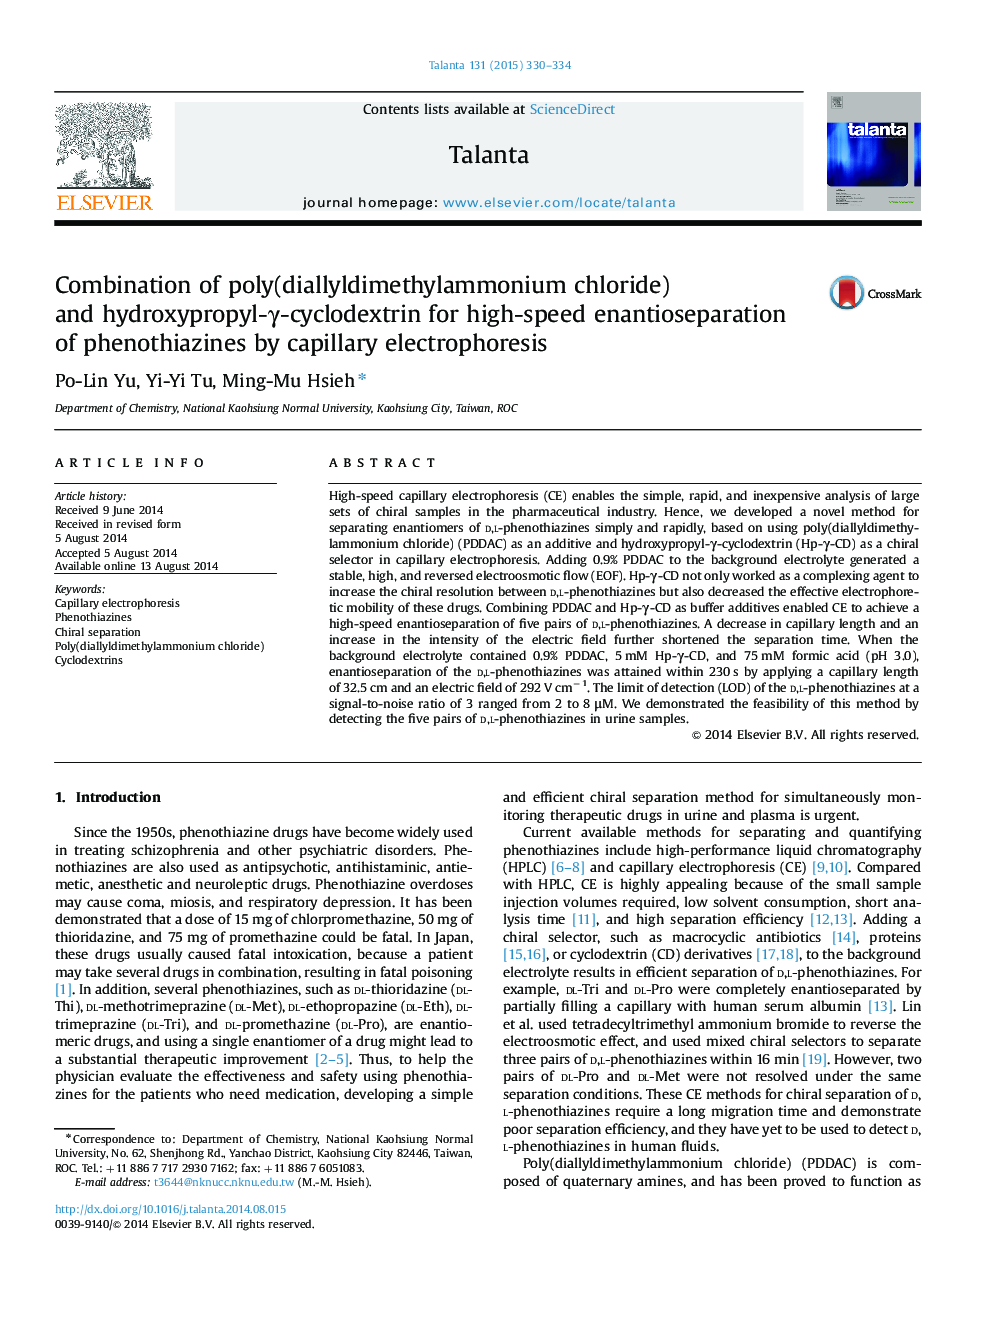 Combination of poly(diallyldimethylammonium chloride) and hydroxypropyl-Î³-cyclodextrin for high-speed enantioseparation of phenothiazines by capillary electrophoresis